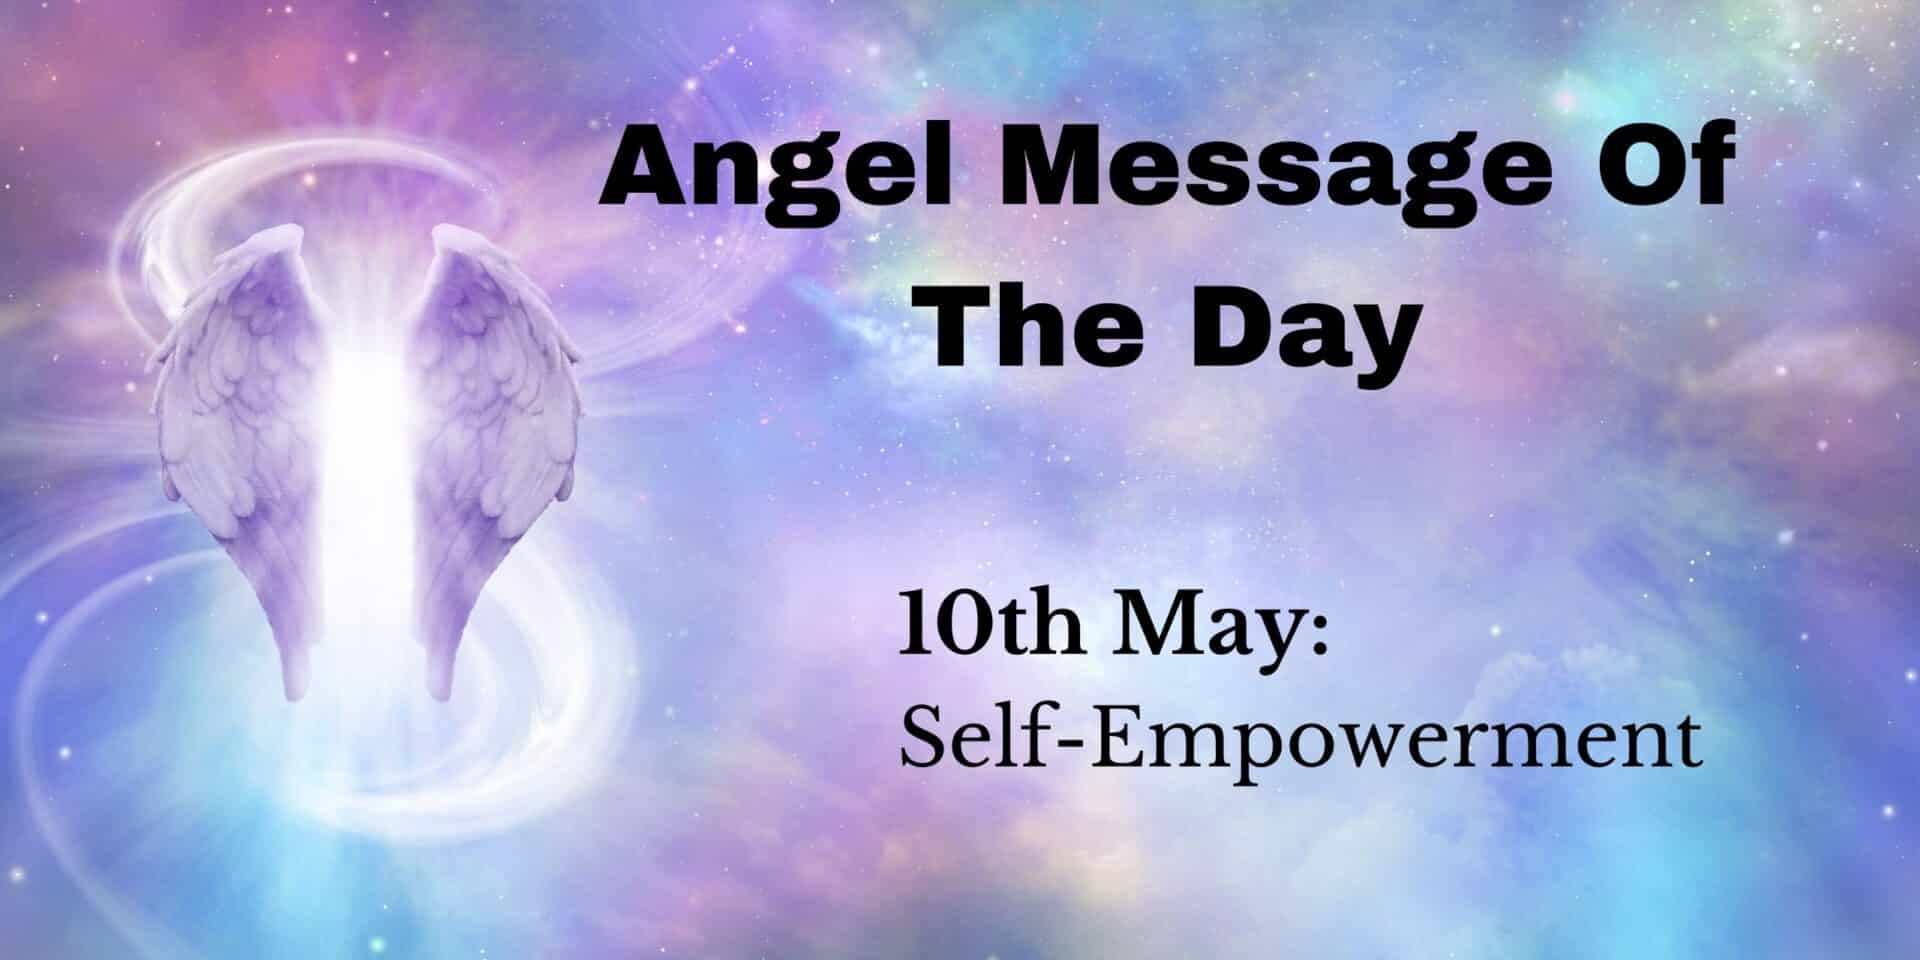 angel message of the day : self-empowerment